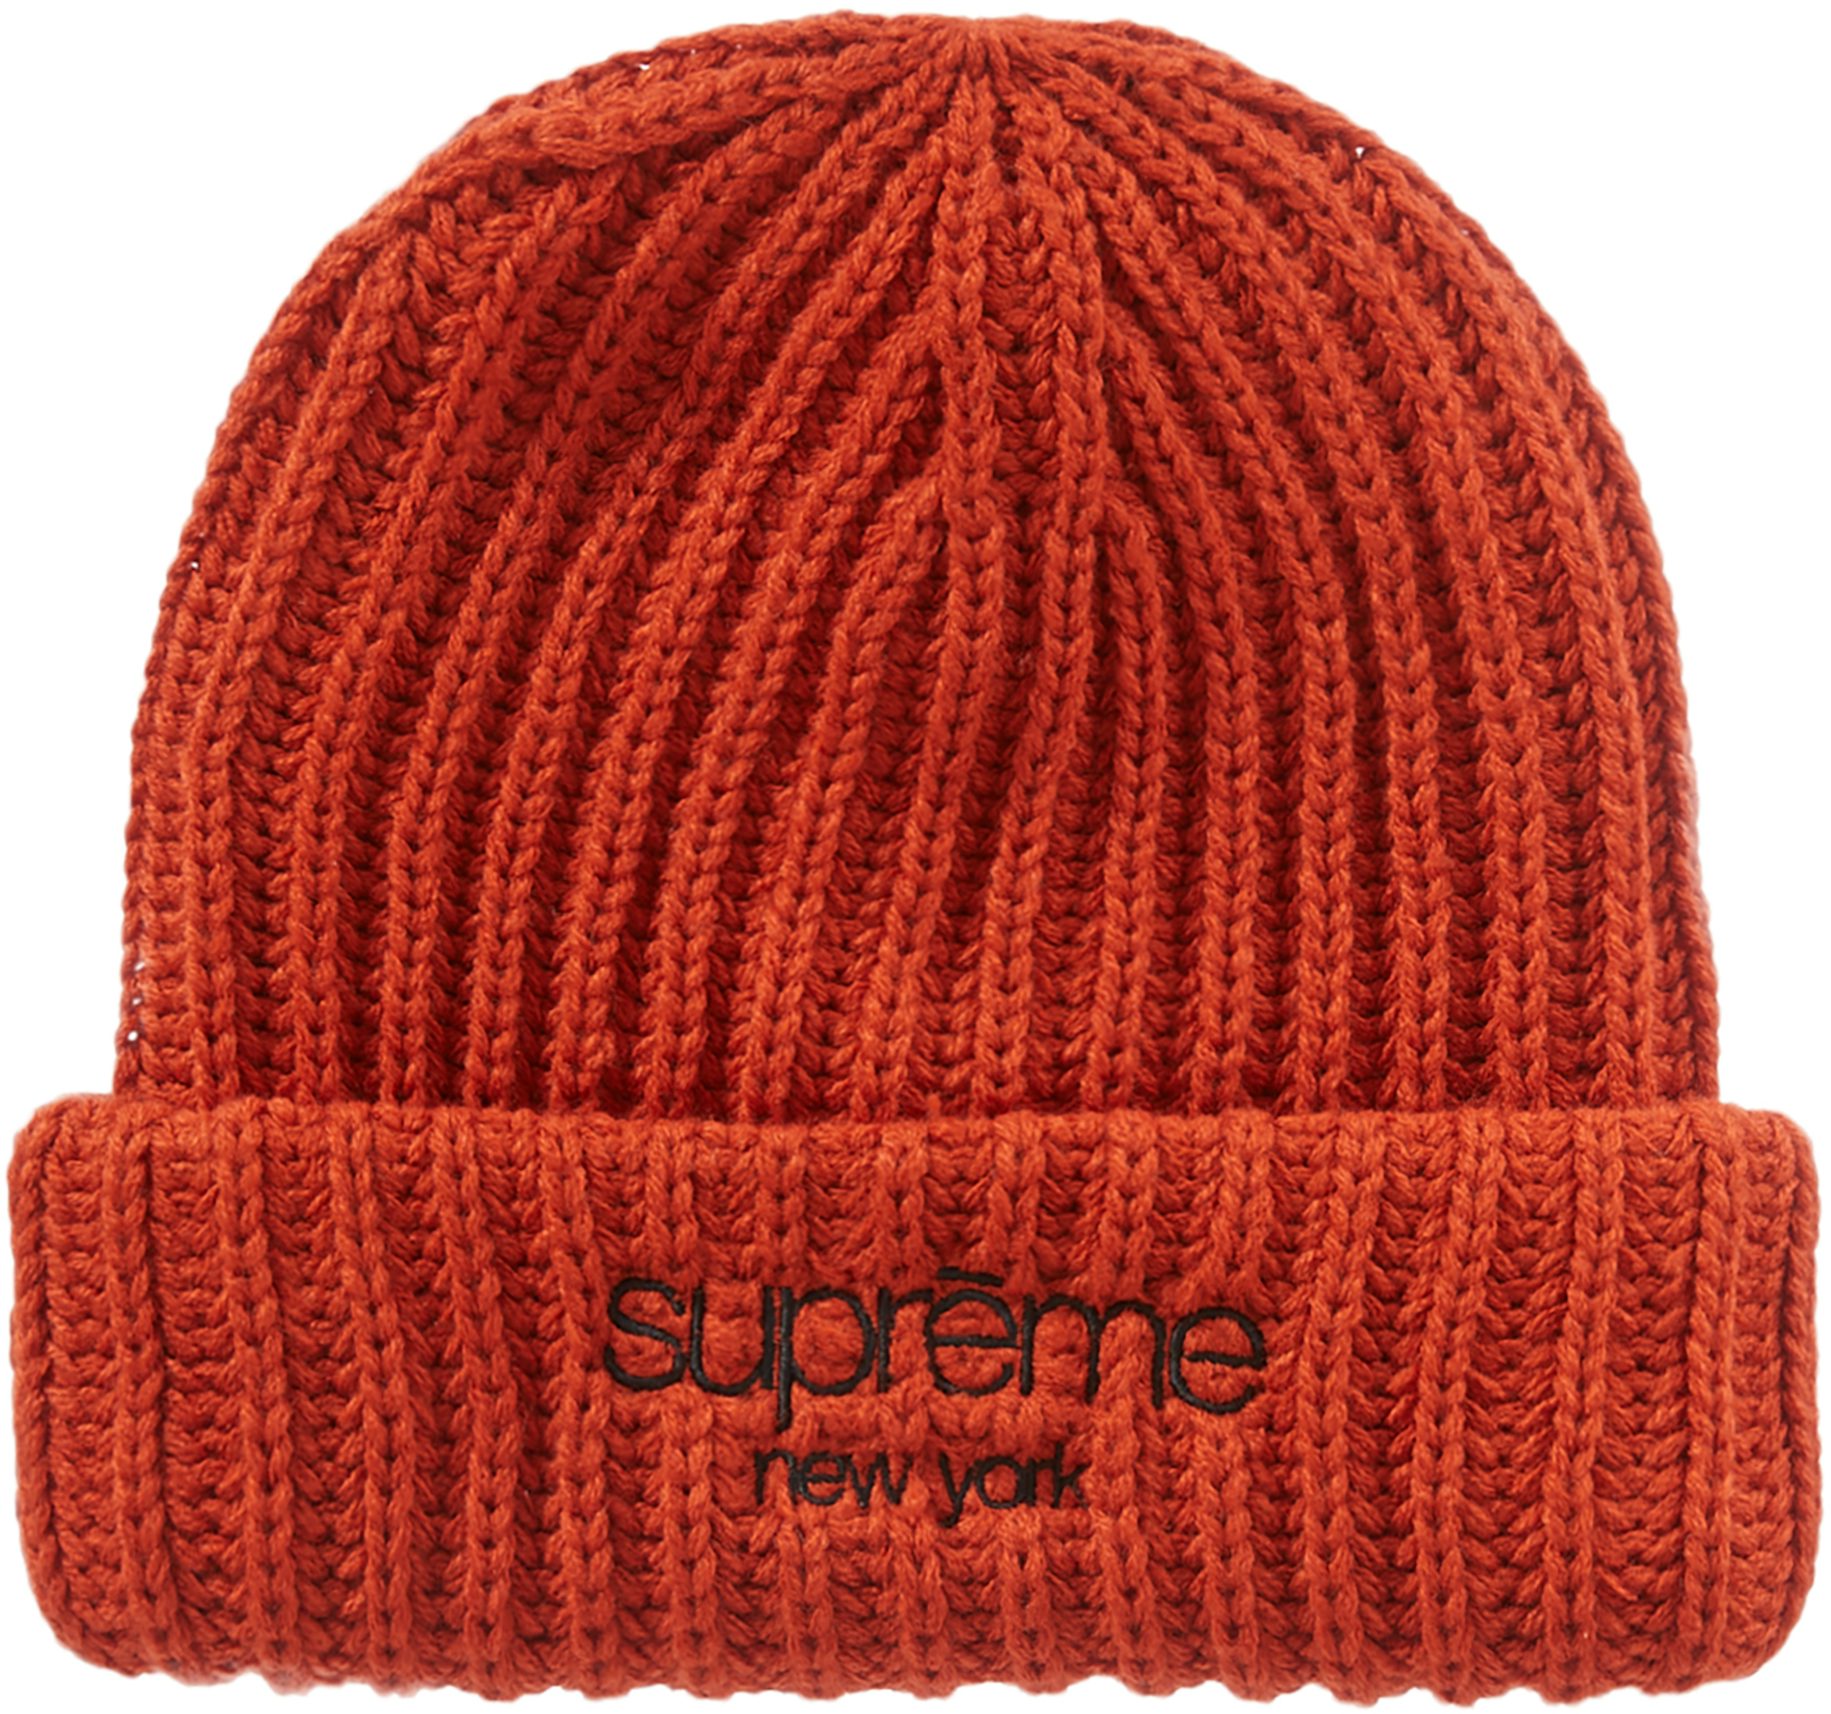 Supreme Overdyed Ribbed Knit Beanie